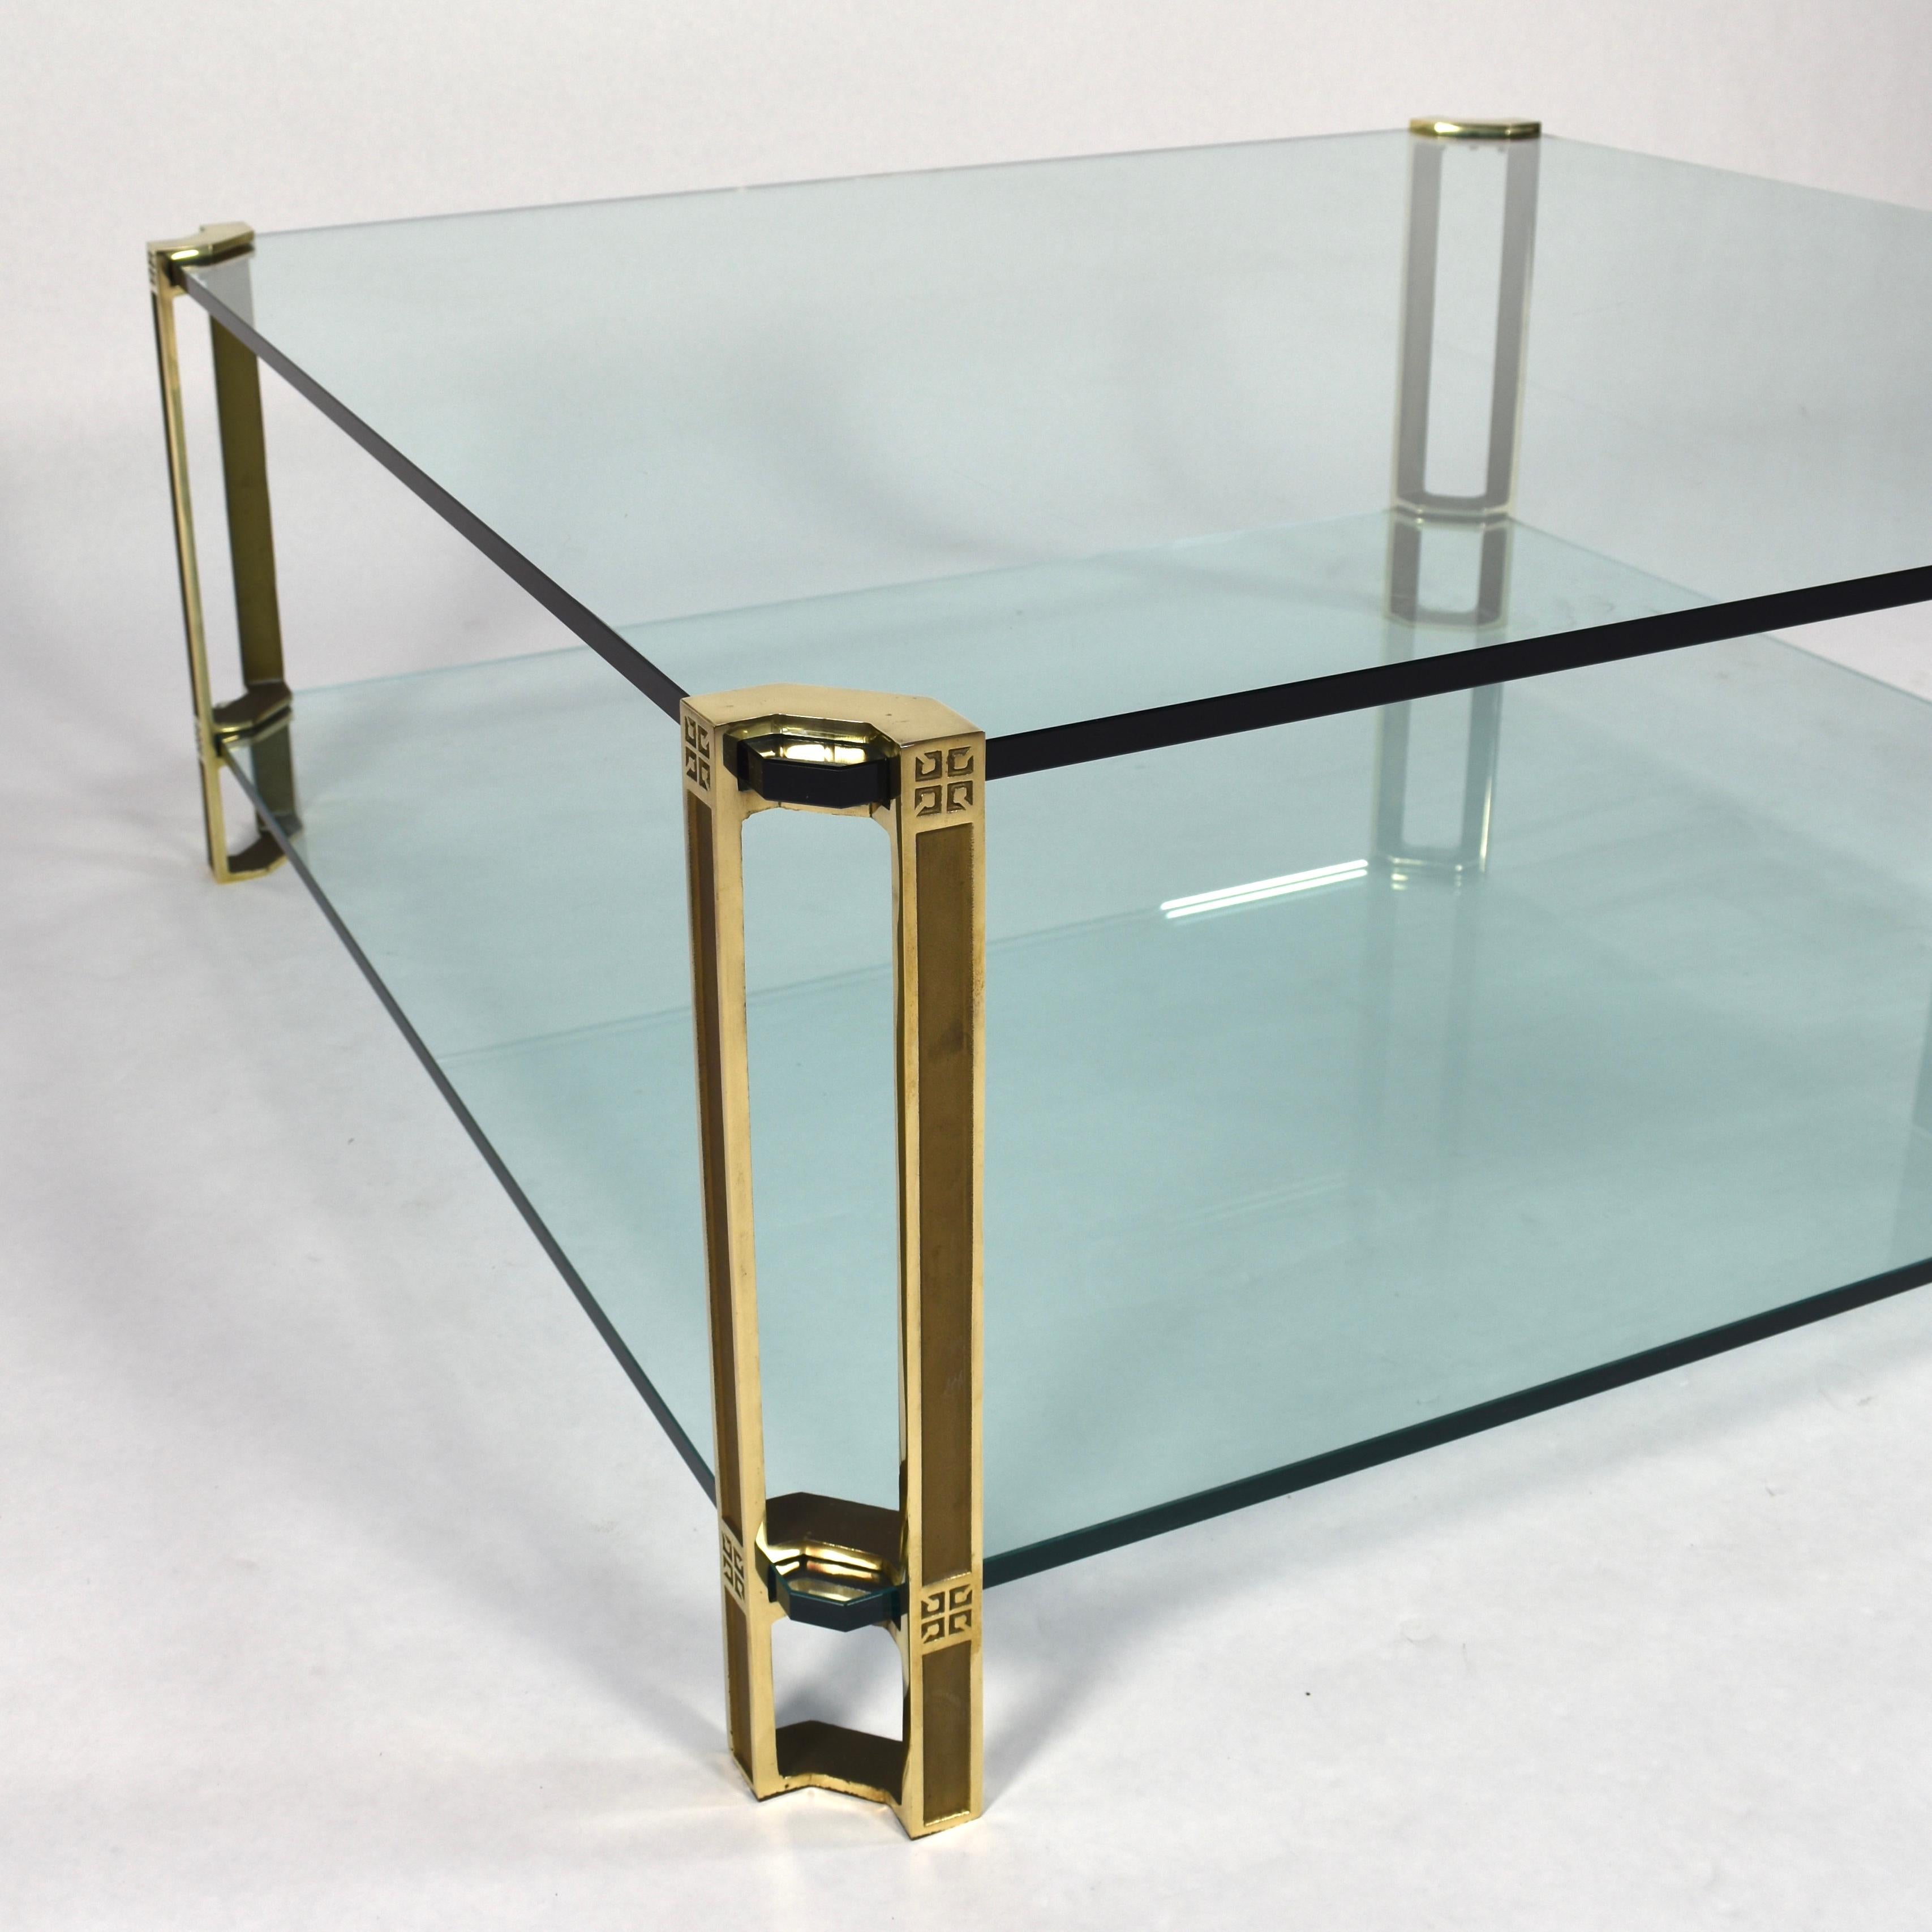 Large Peter Ghyczy coffee table in solid brass and glass. Gorgeous centerpiece for a seating corner or other. Peter Ghyczy was a German designer that started a company in The Netherlands were he designed a lot of famous items among which his glass